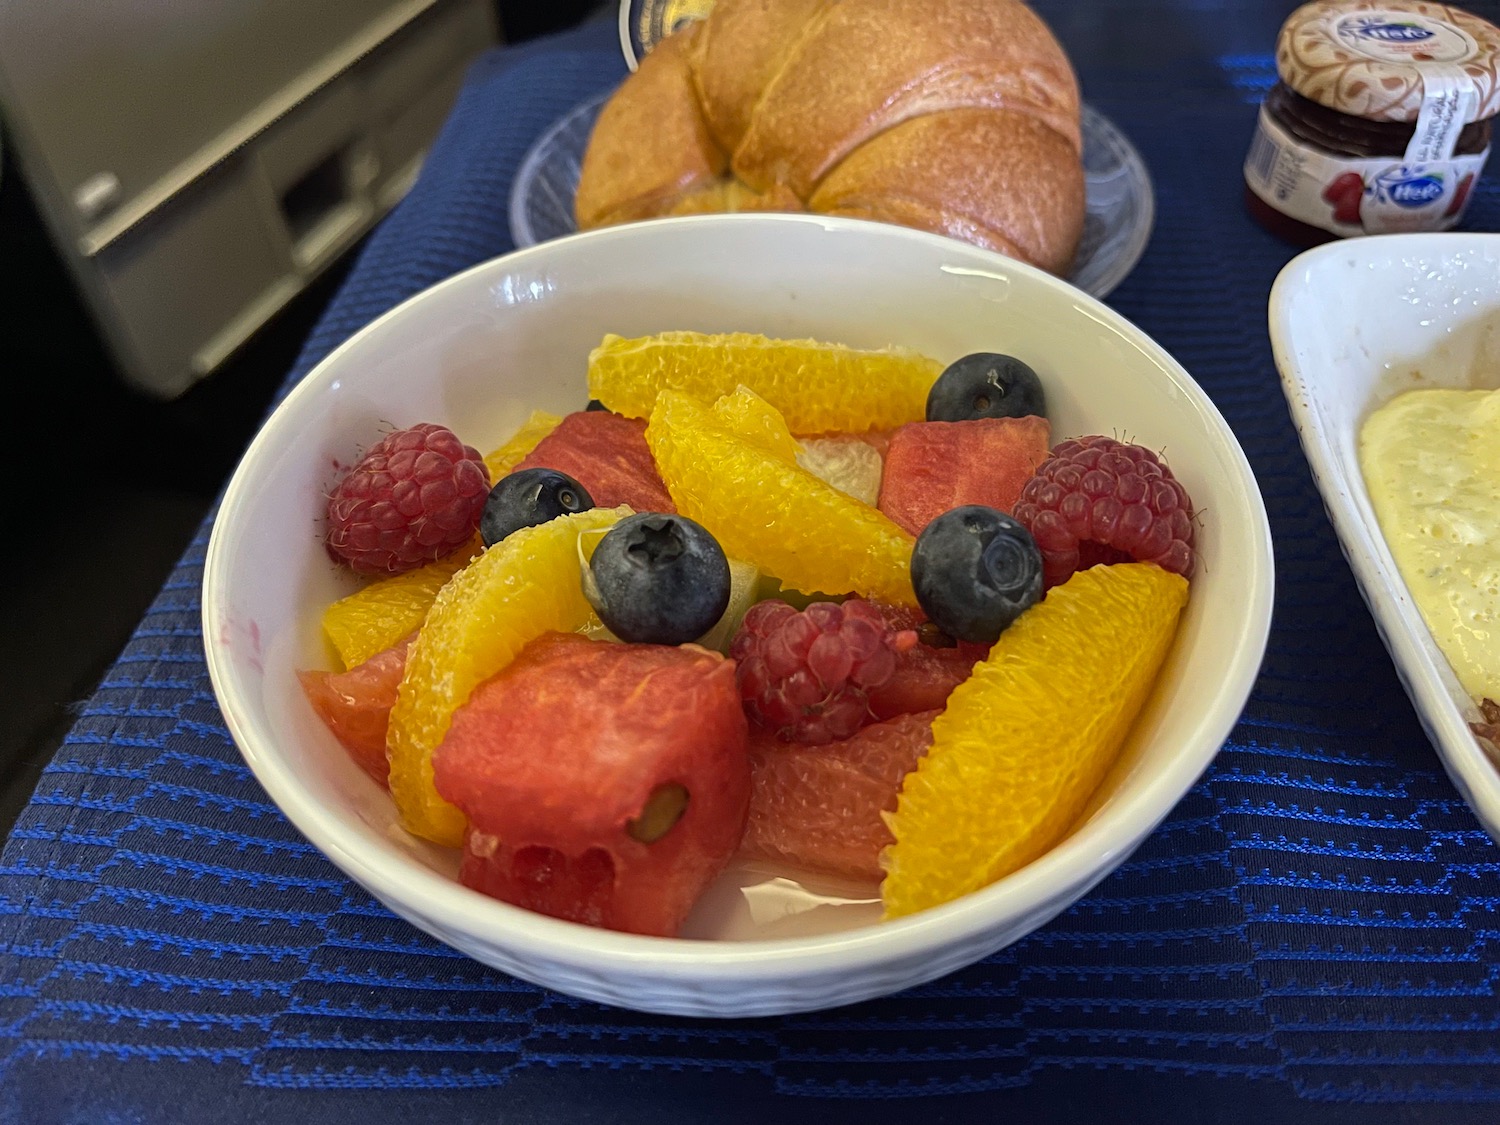 a bowl of fruit and a croissant